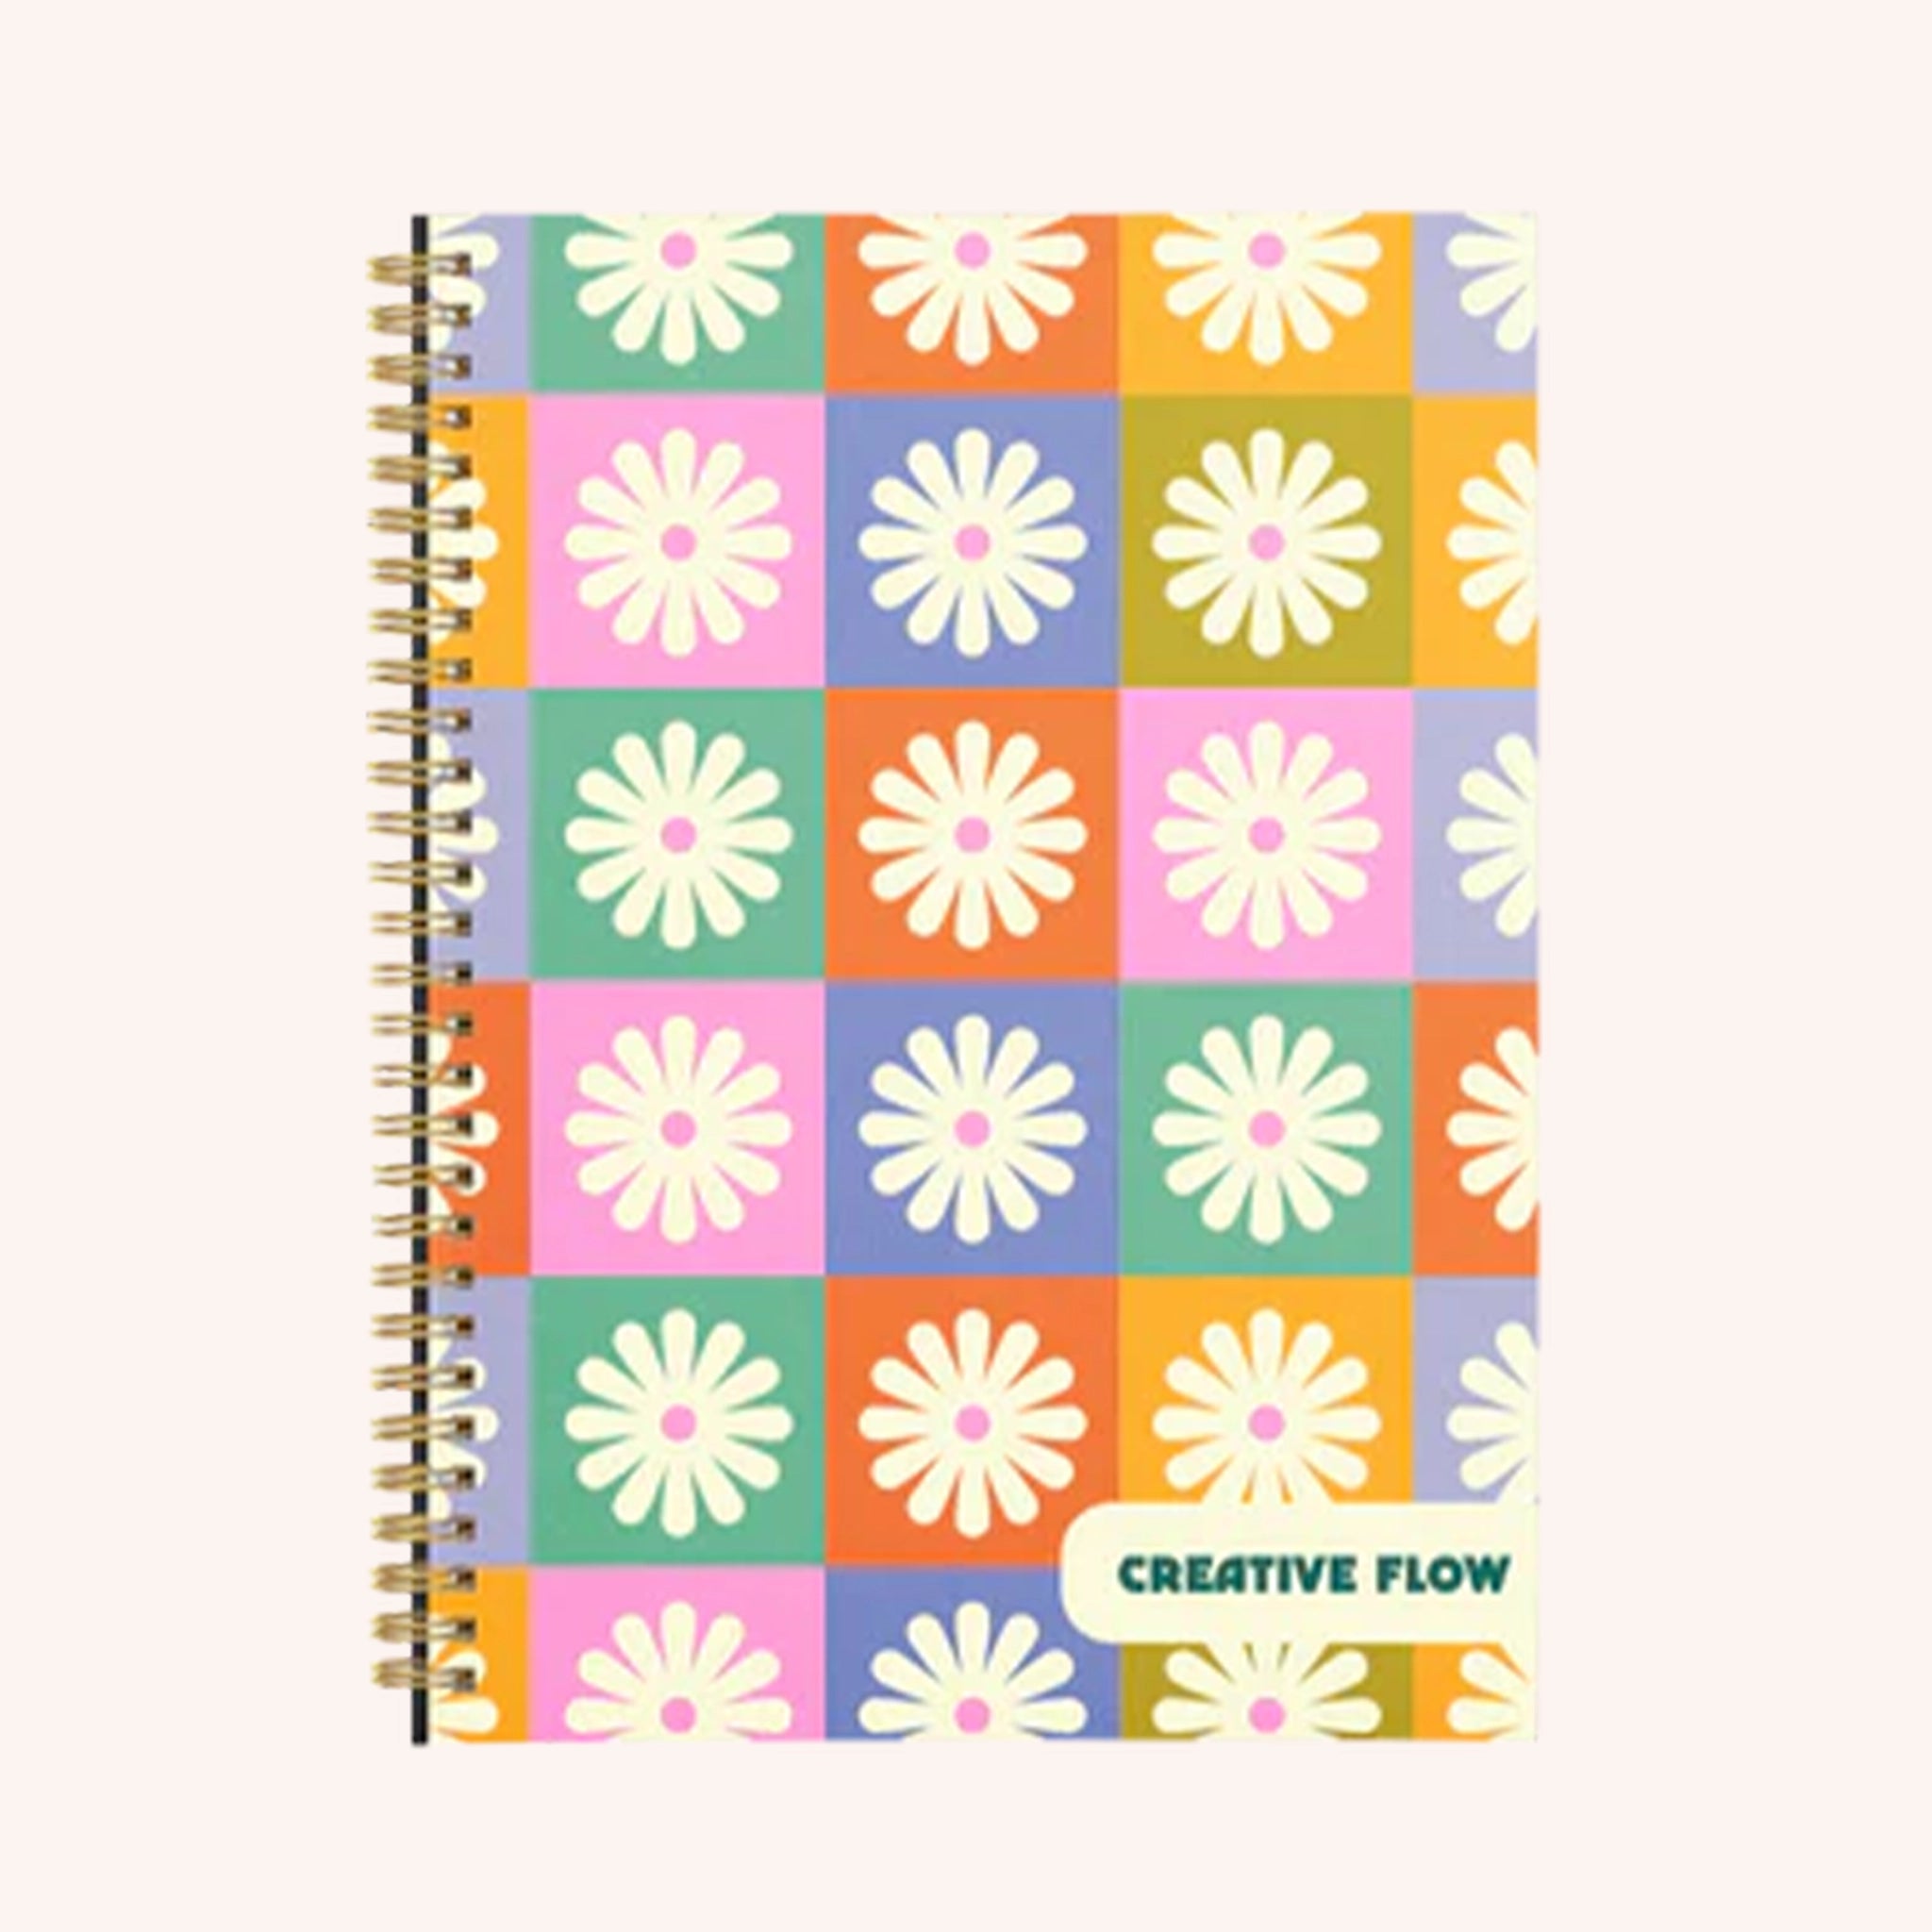 A spiral bound notebook with a multicolored checker design that has a white daisy in the center of each square. In the bottom right hand corner it says, "Creative Flow" in green text.